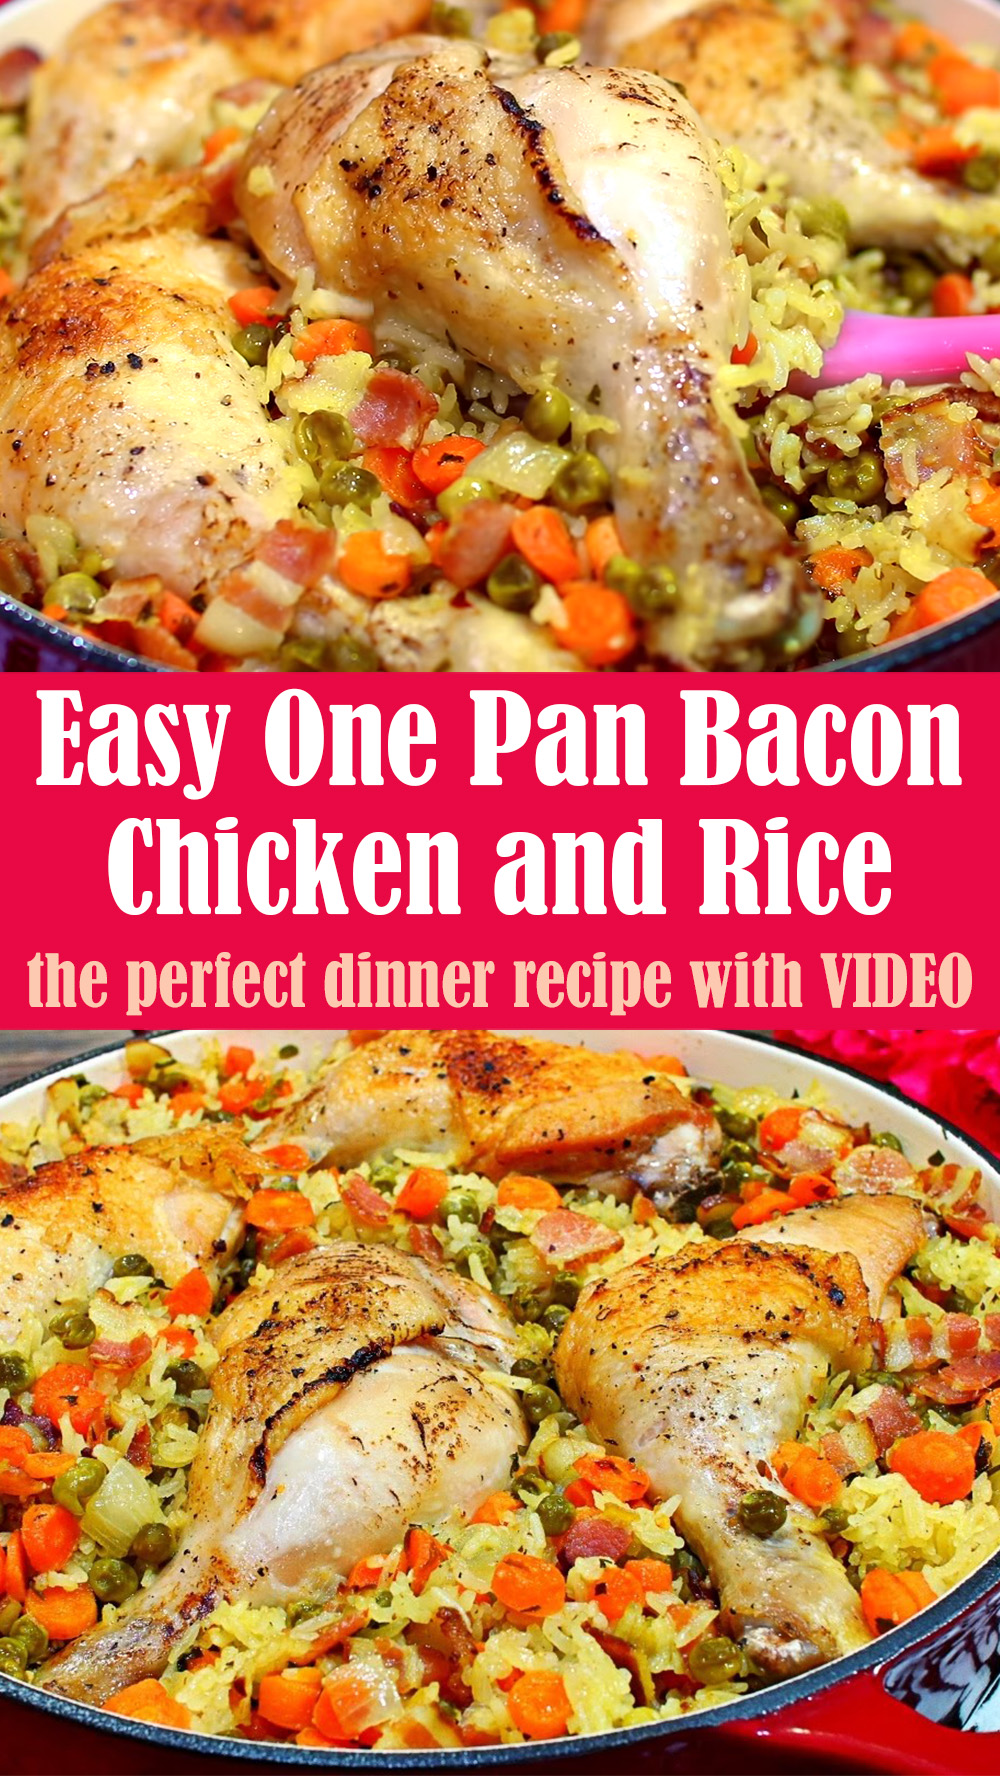 Easy One Pan Bacon Chicken and Rice Recipe